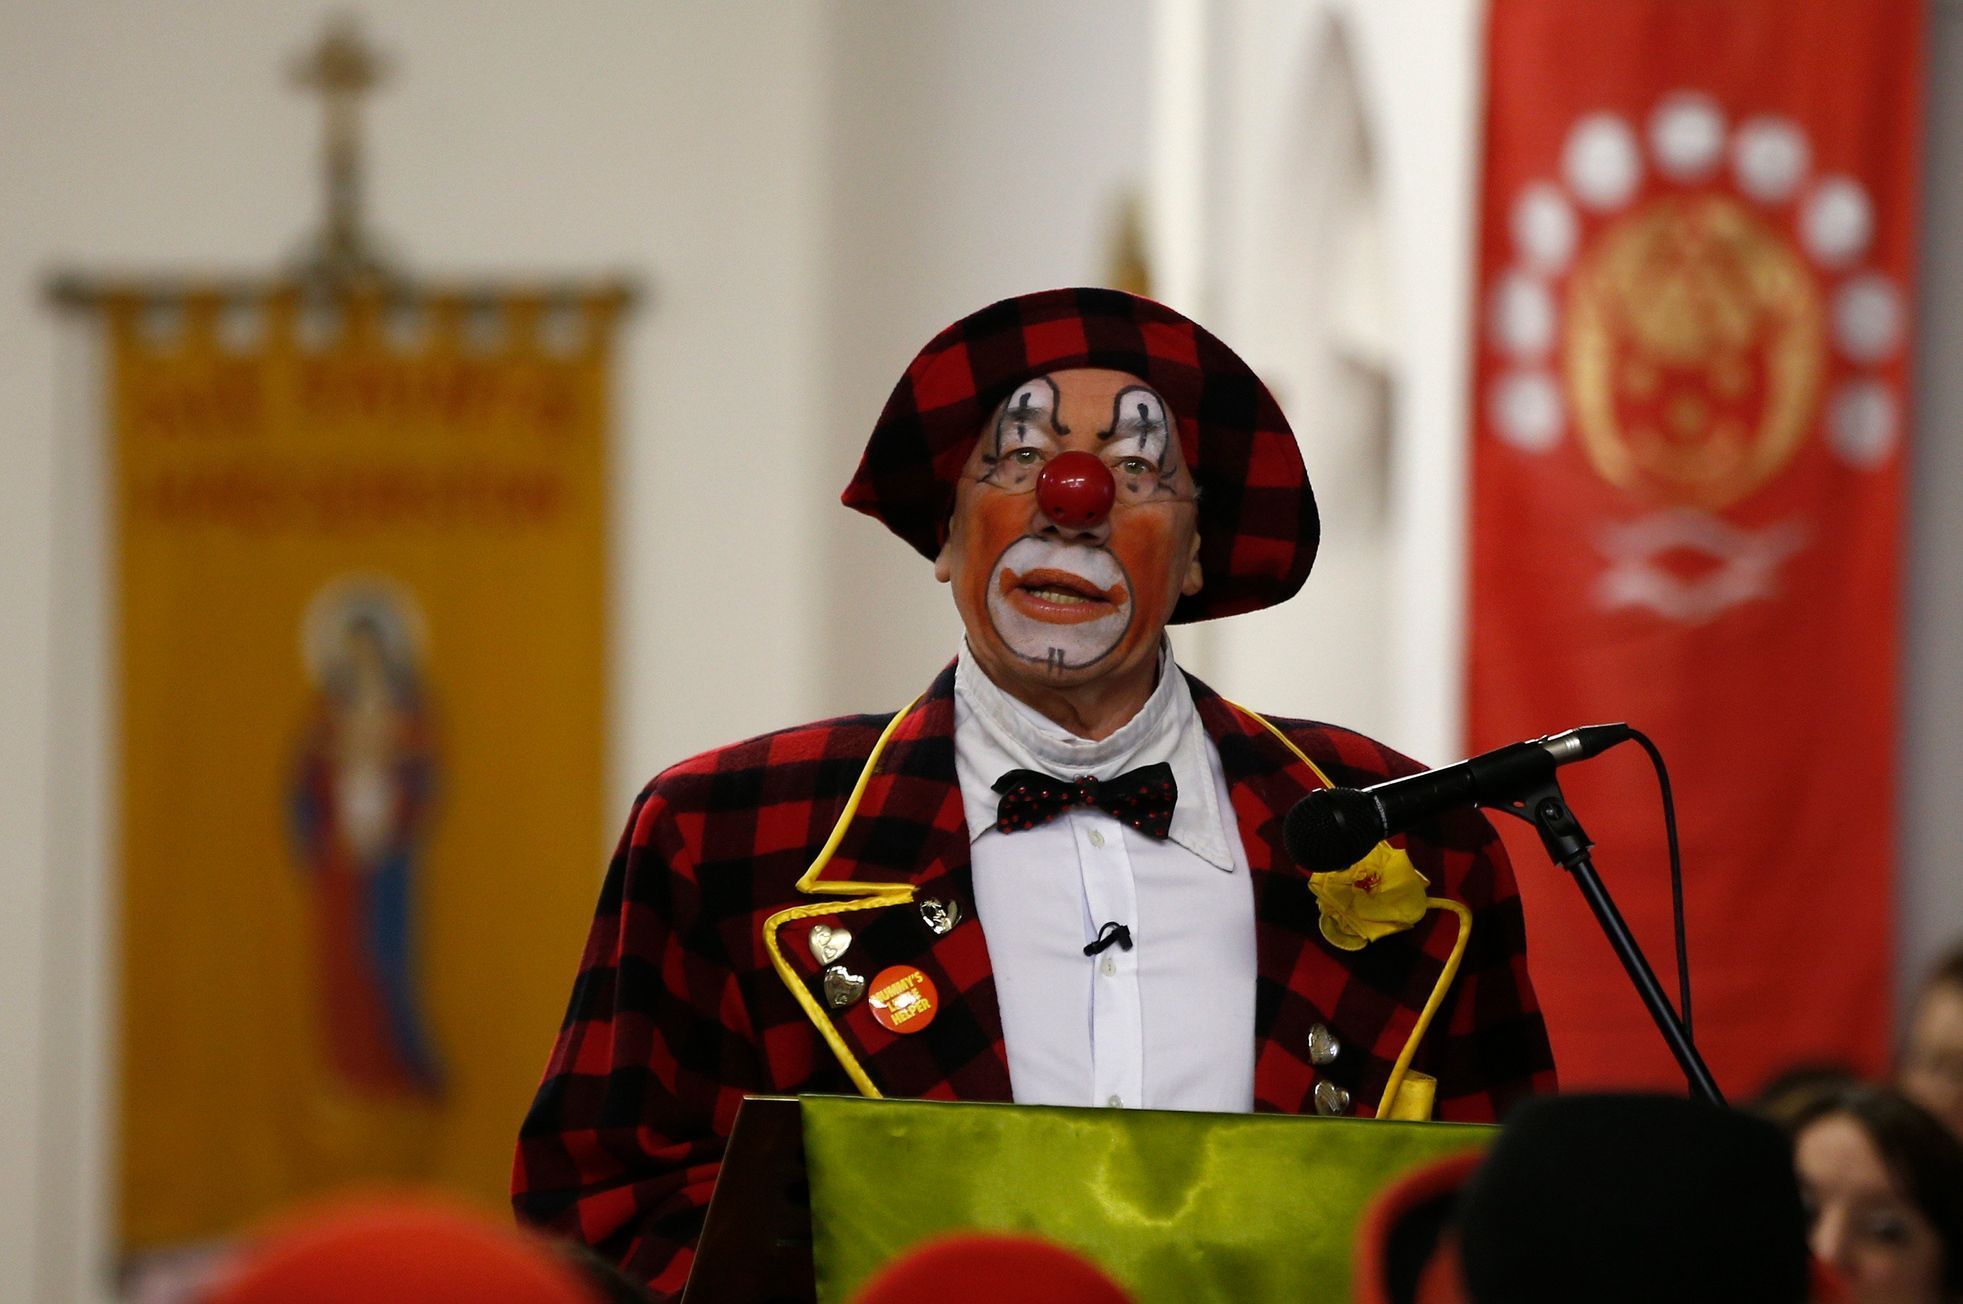 British actor Callow pauses during a reading, while dressed as clown at the All Saints Church during the Grimaldi clown service in Dalston, north London